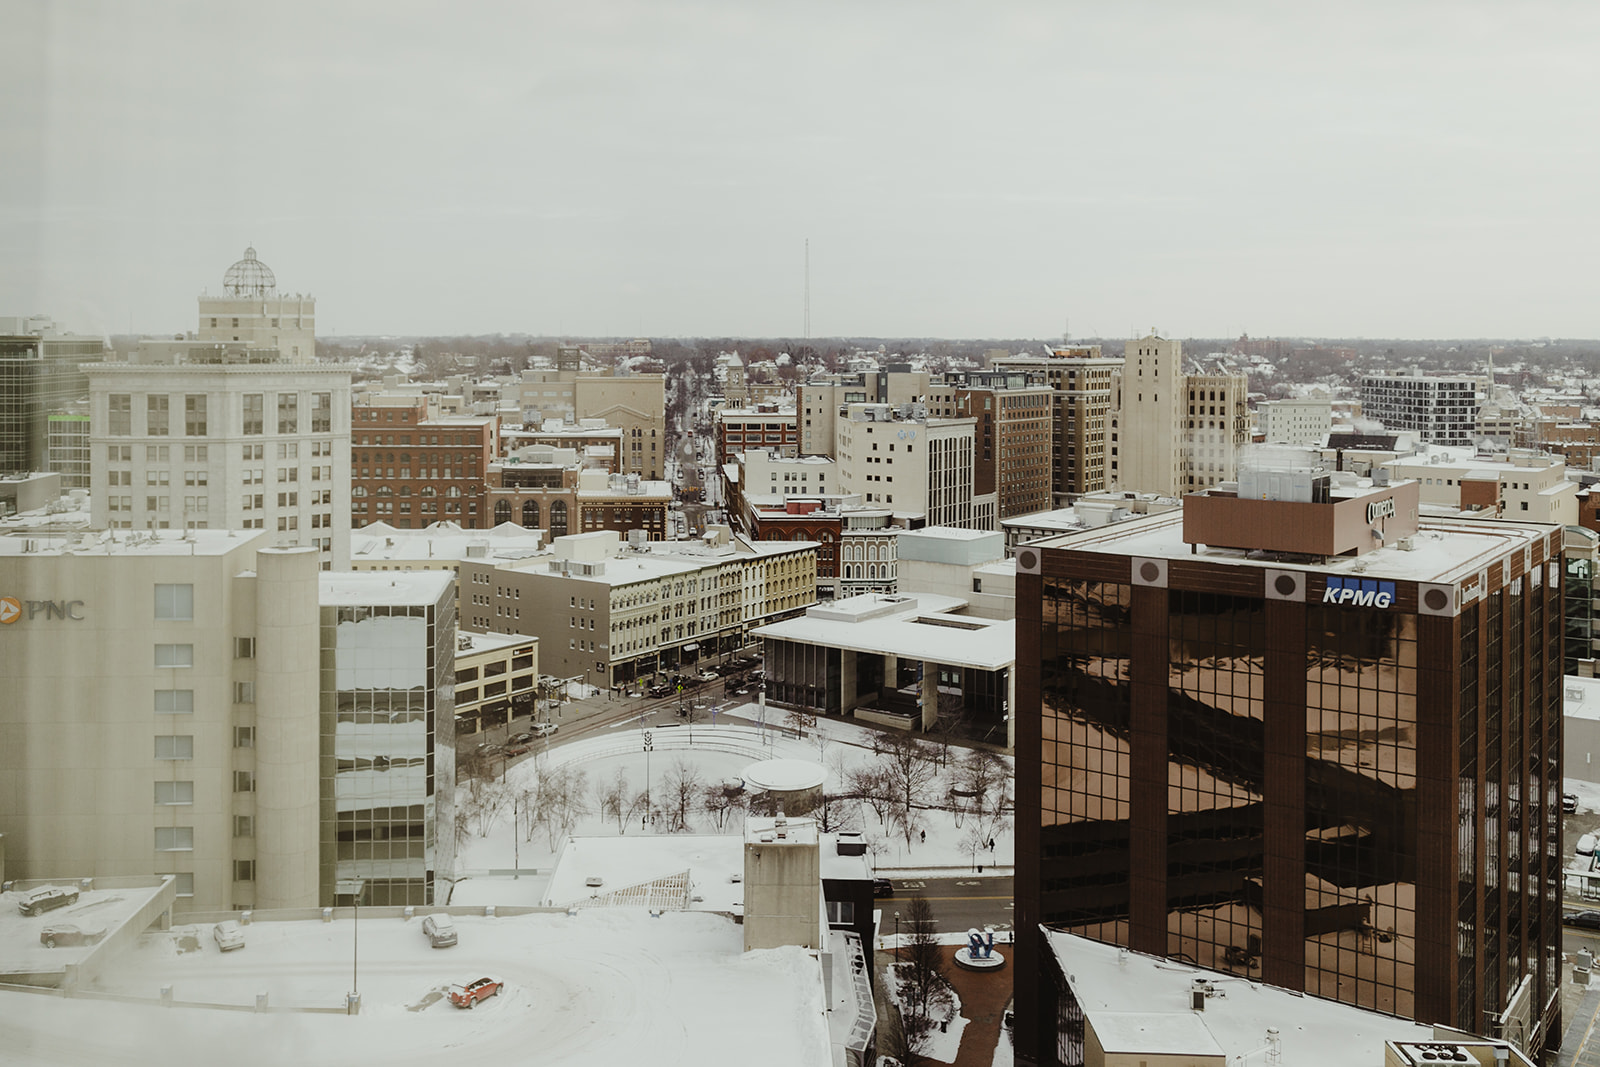 Downtown grand rapids set for a winter wedding in michigan